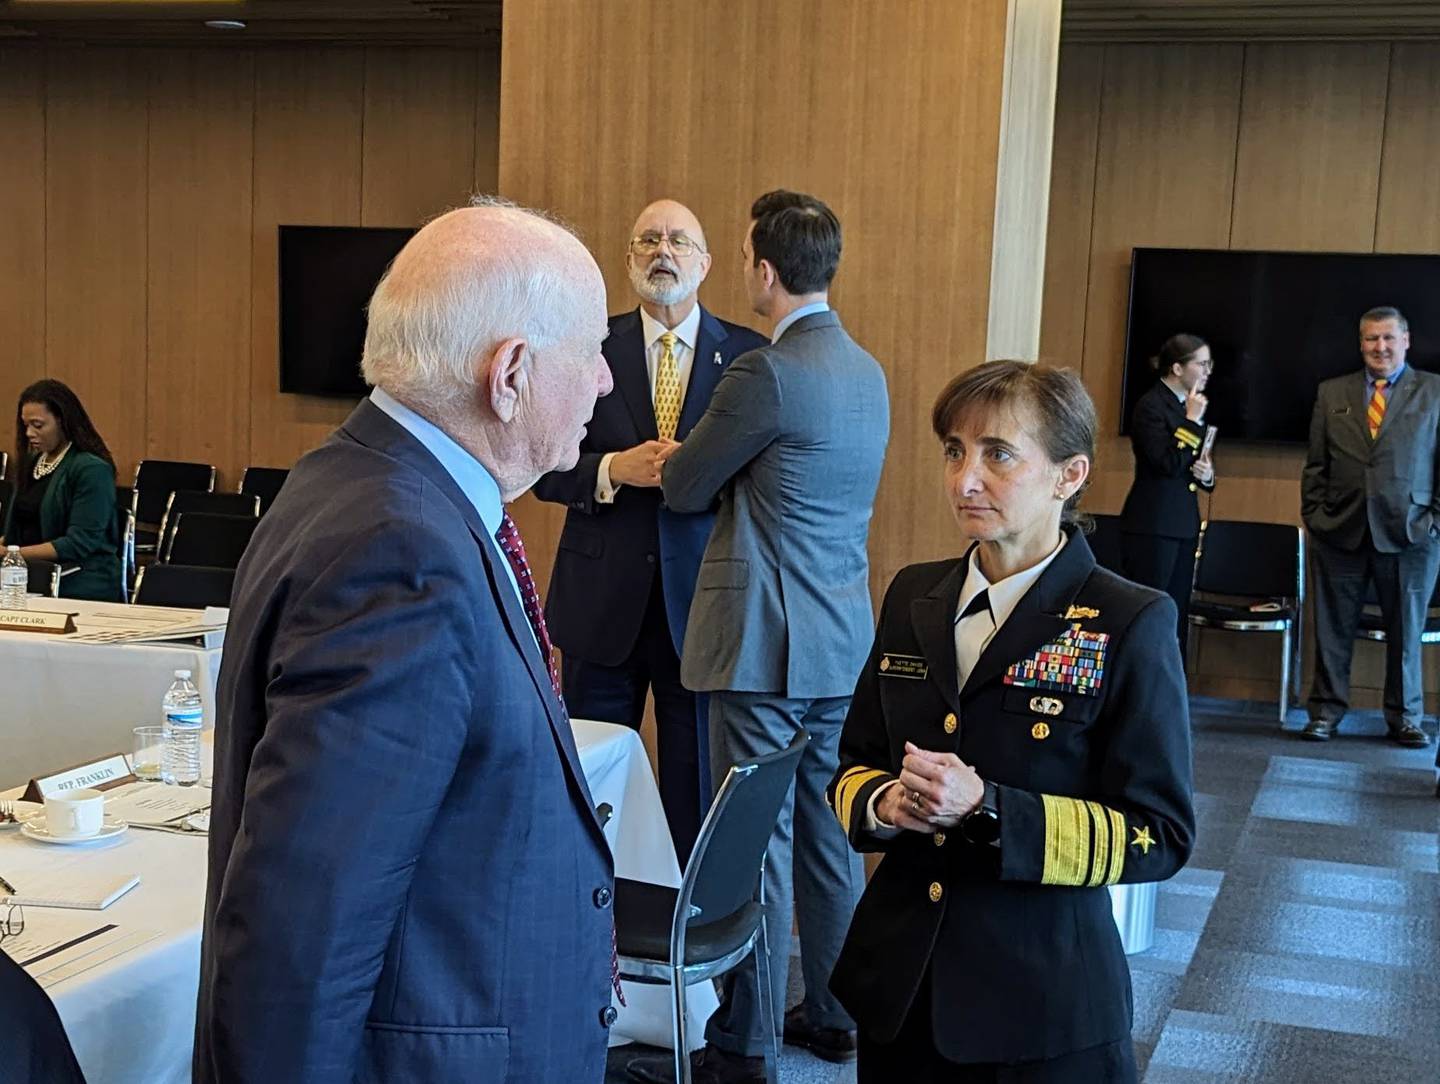 Vice Adm. Yvette Davids talks with U.S. Sen. Ben Cardin on Tuesday, March 19 at the Naval Academy Board of Visitors meeting in Annapolis. Davids is the first woman academy superintendent.